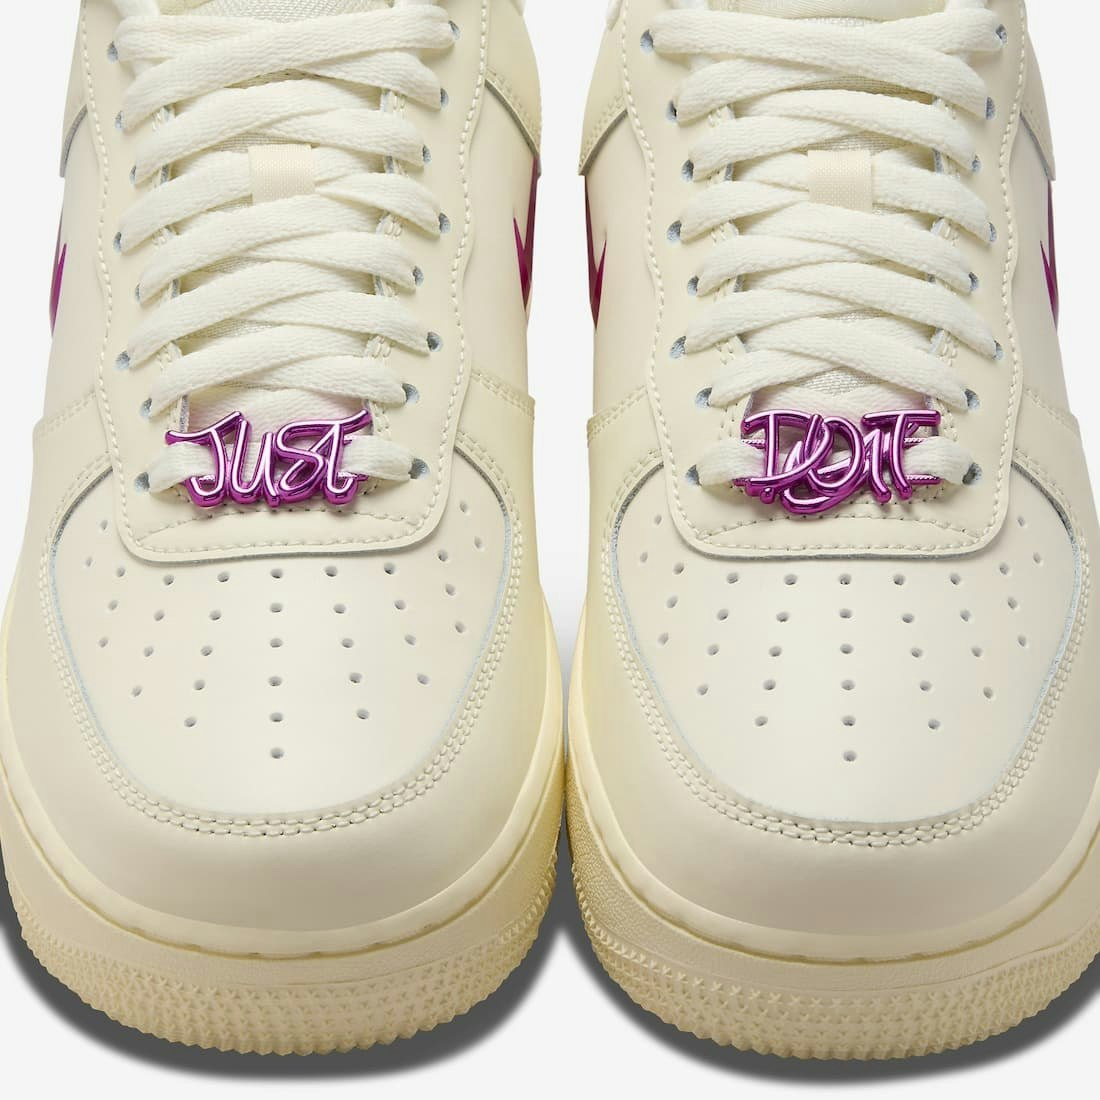 Nike Air Force 1 ’07 SE "Just Do It" (Coconut Milk)